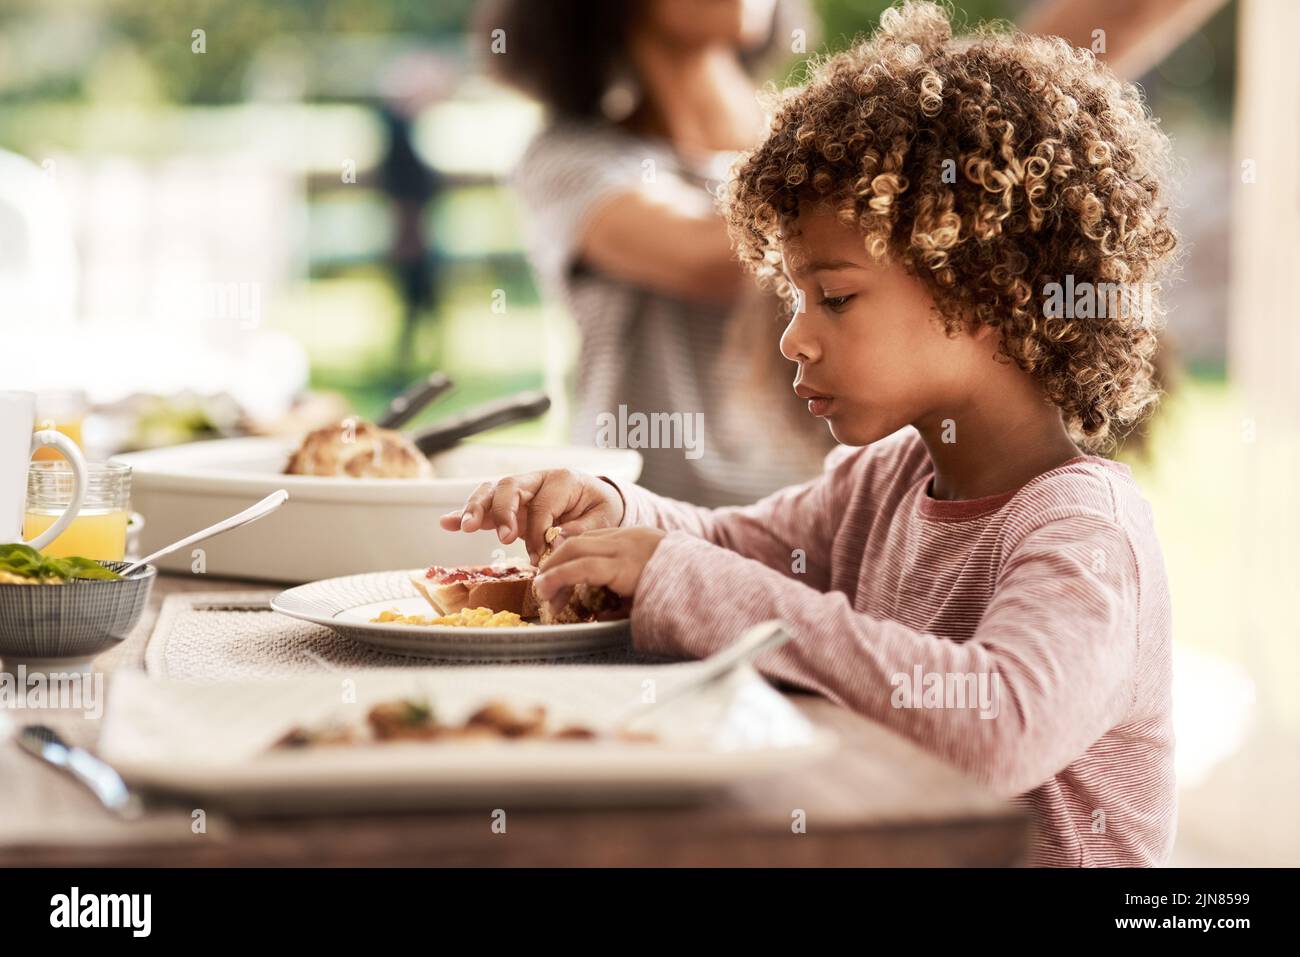 Hes always ready to eat. a young boy eating his food. Stock Photo